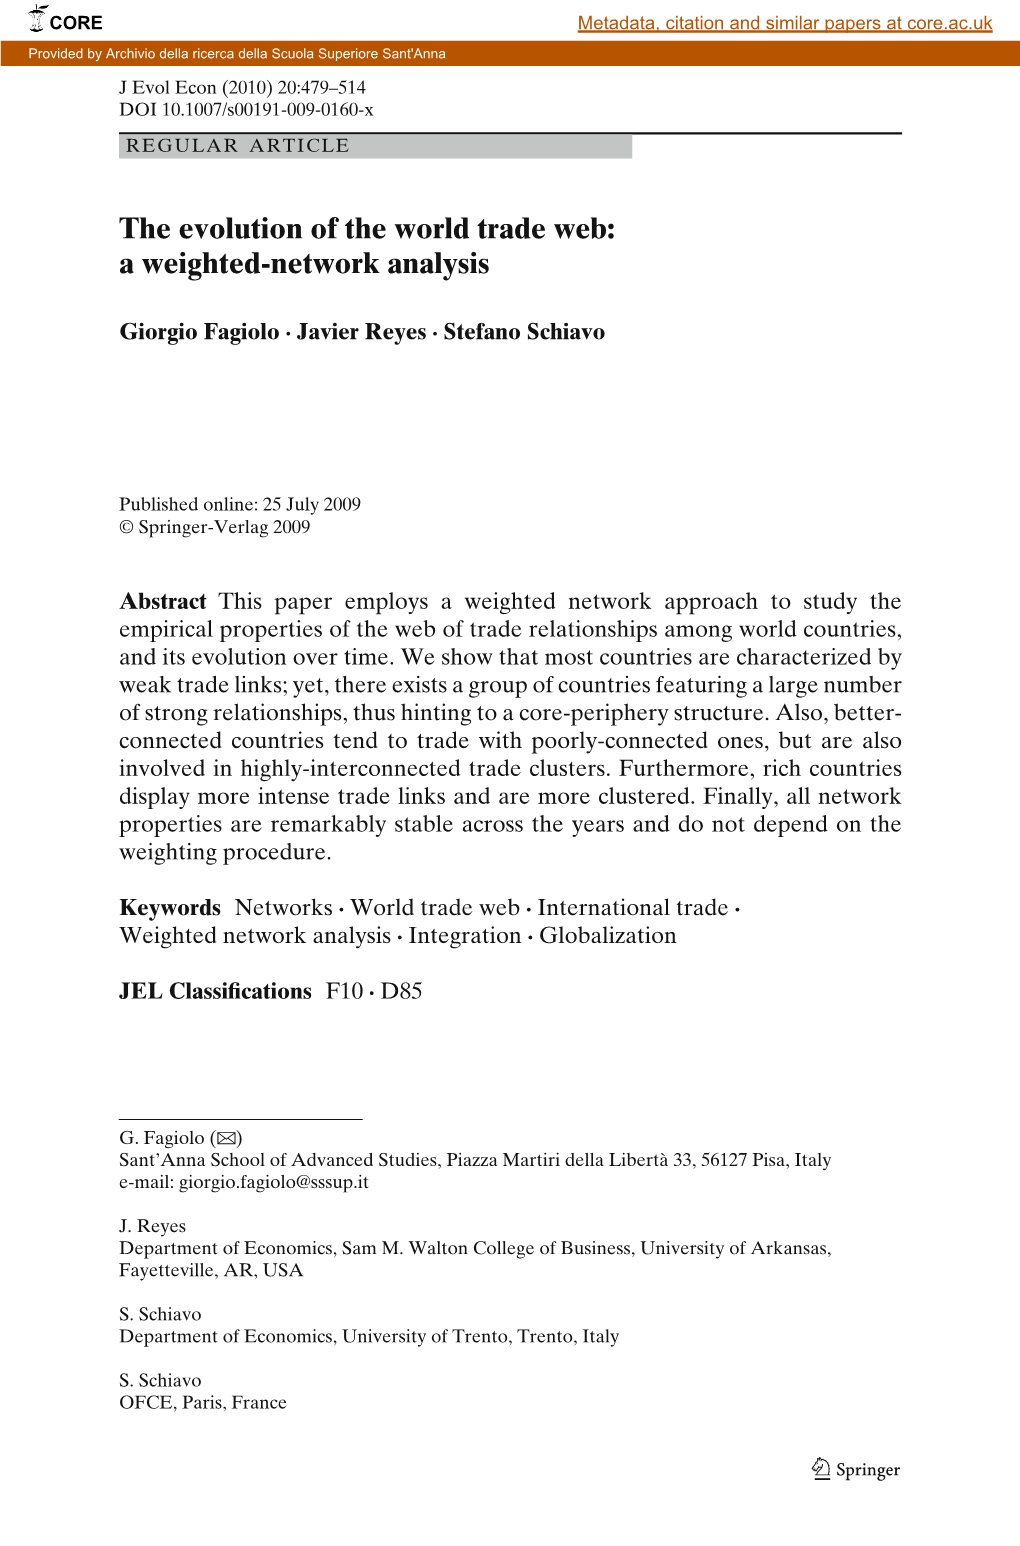 The Evolution of the World Trade Web: a Weighted-Network Analysis